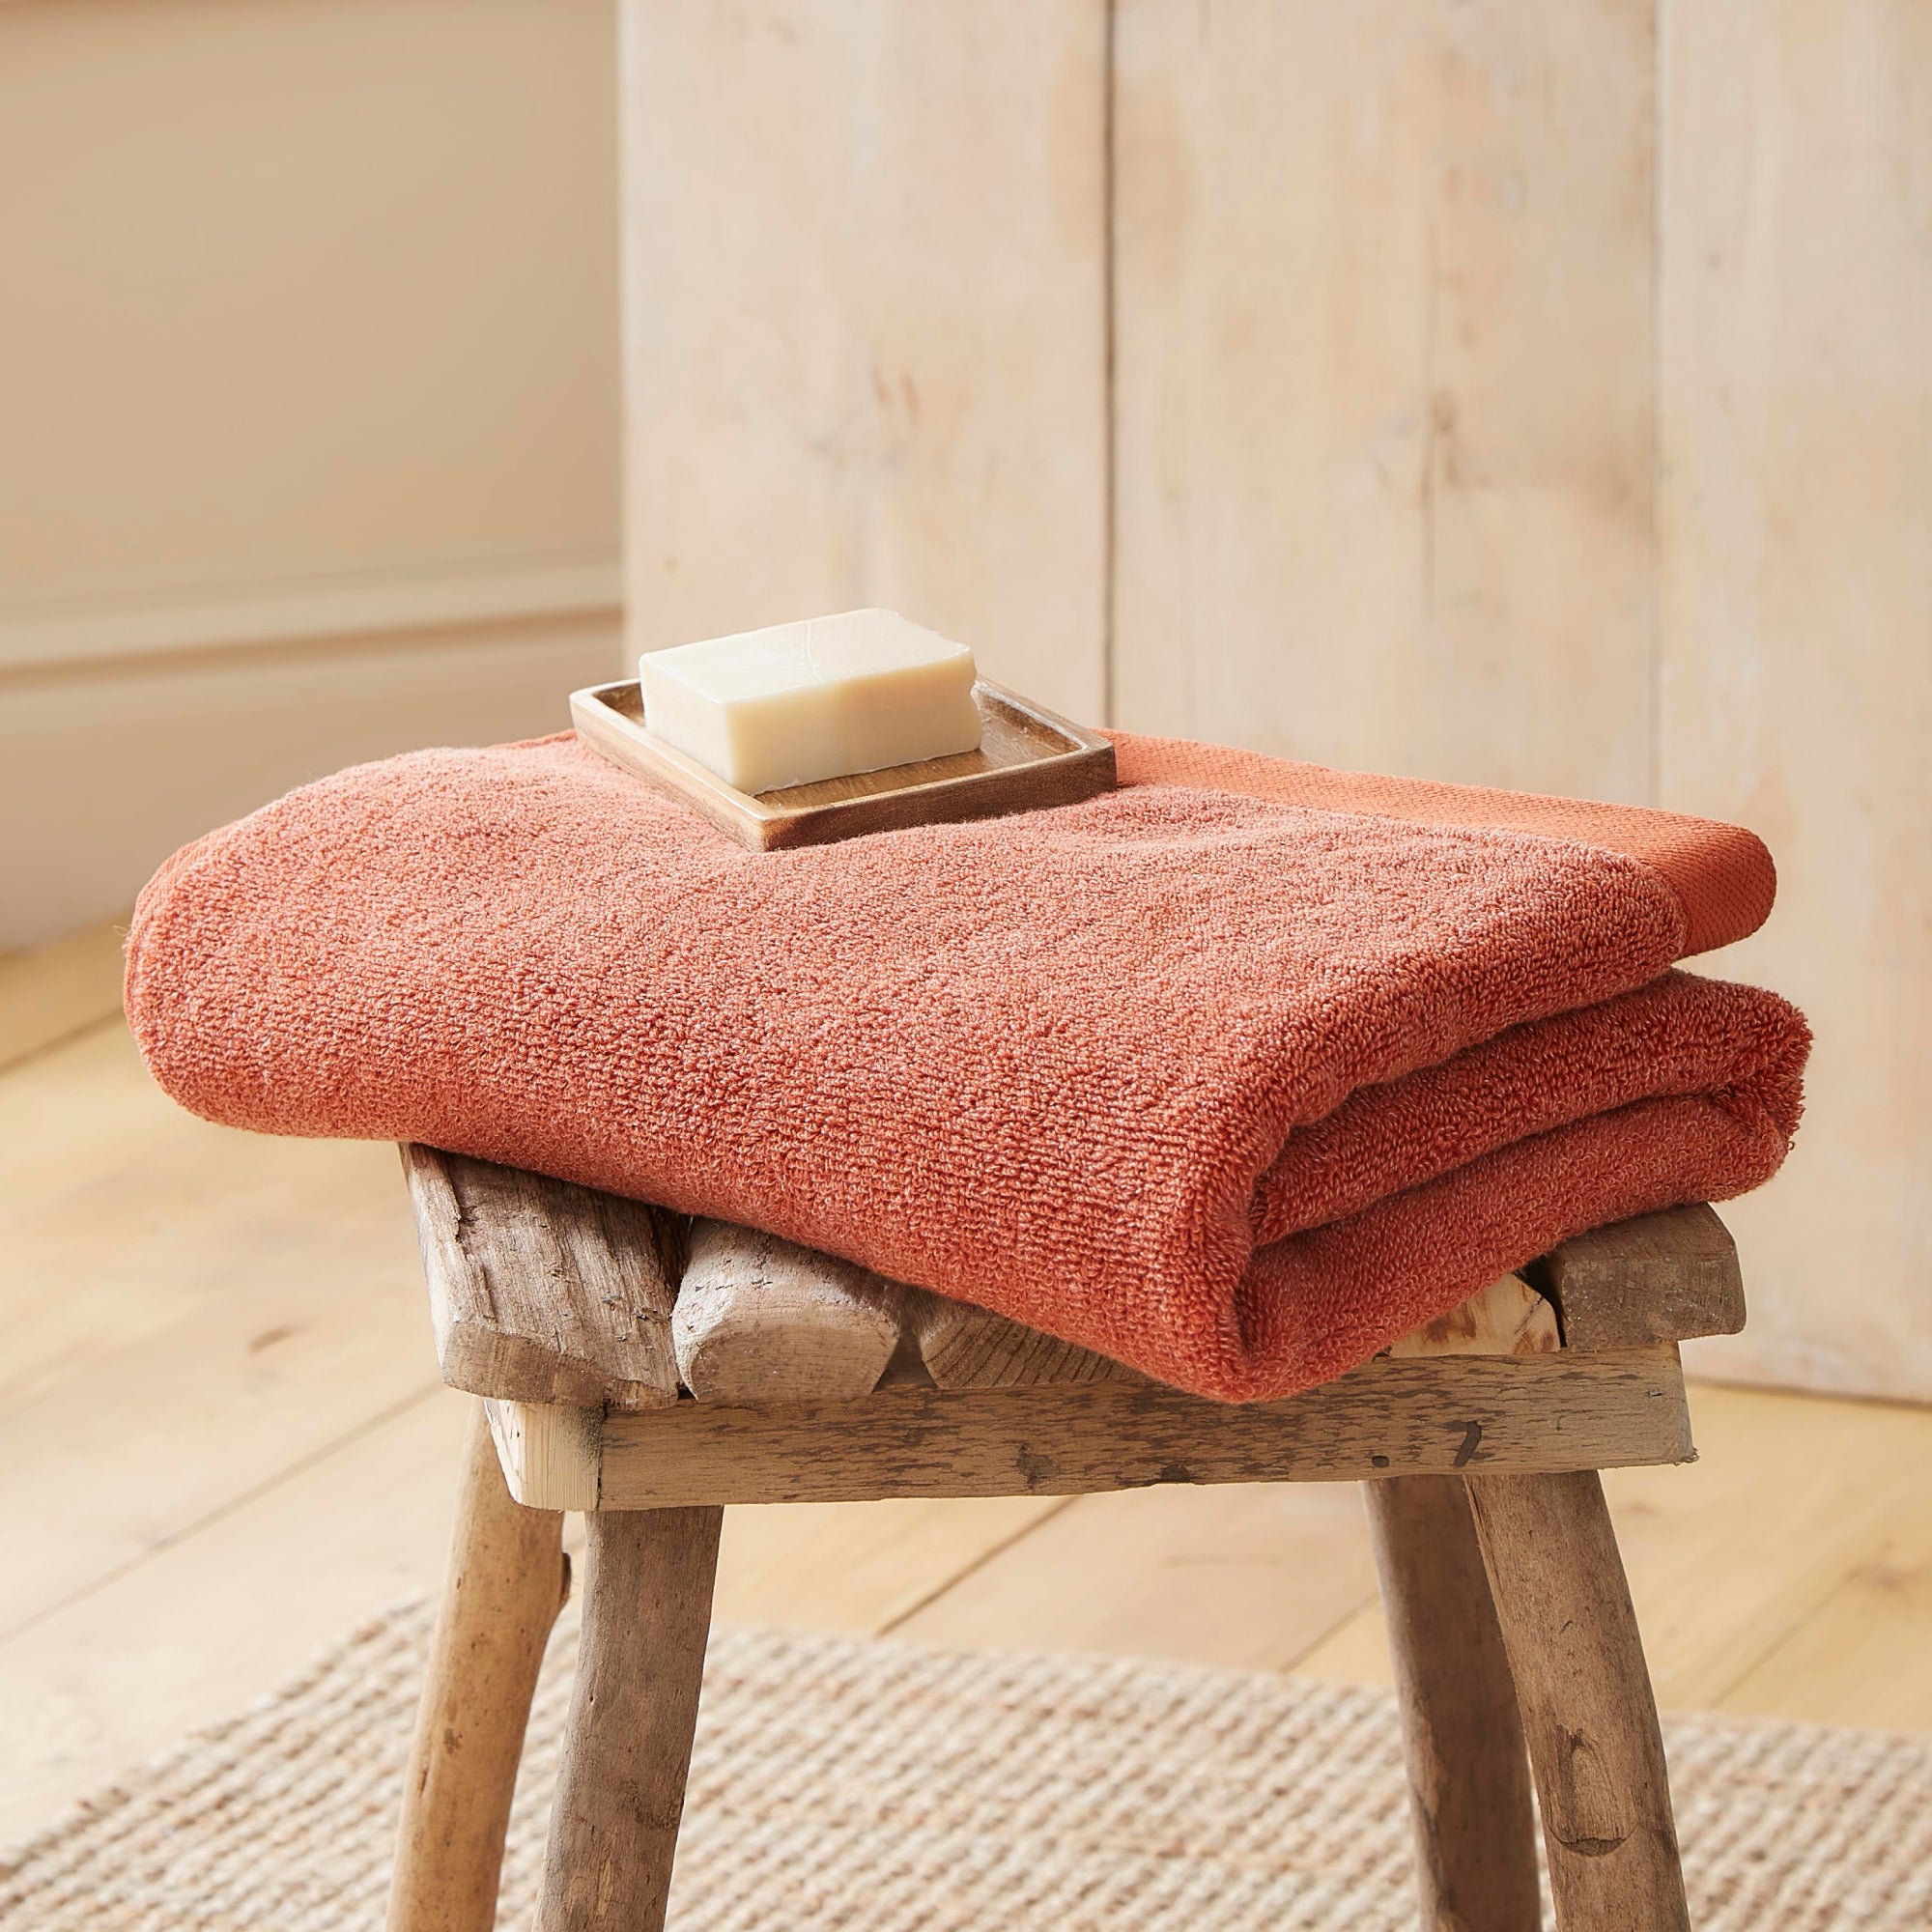 Hand Towel Abode Eco by Drift Home in Terracotta